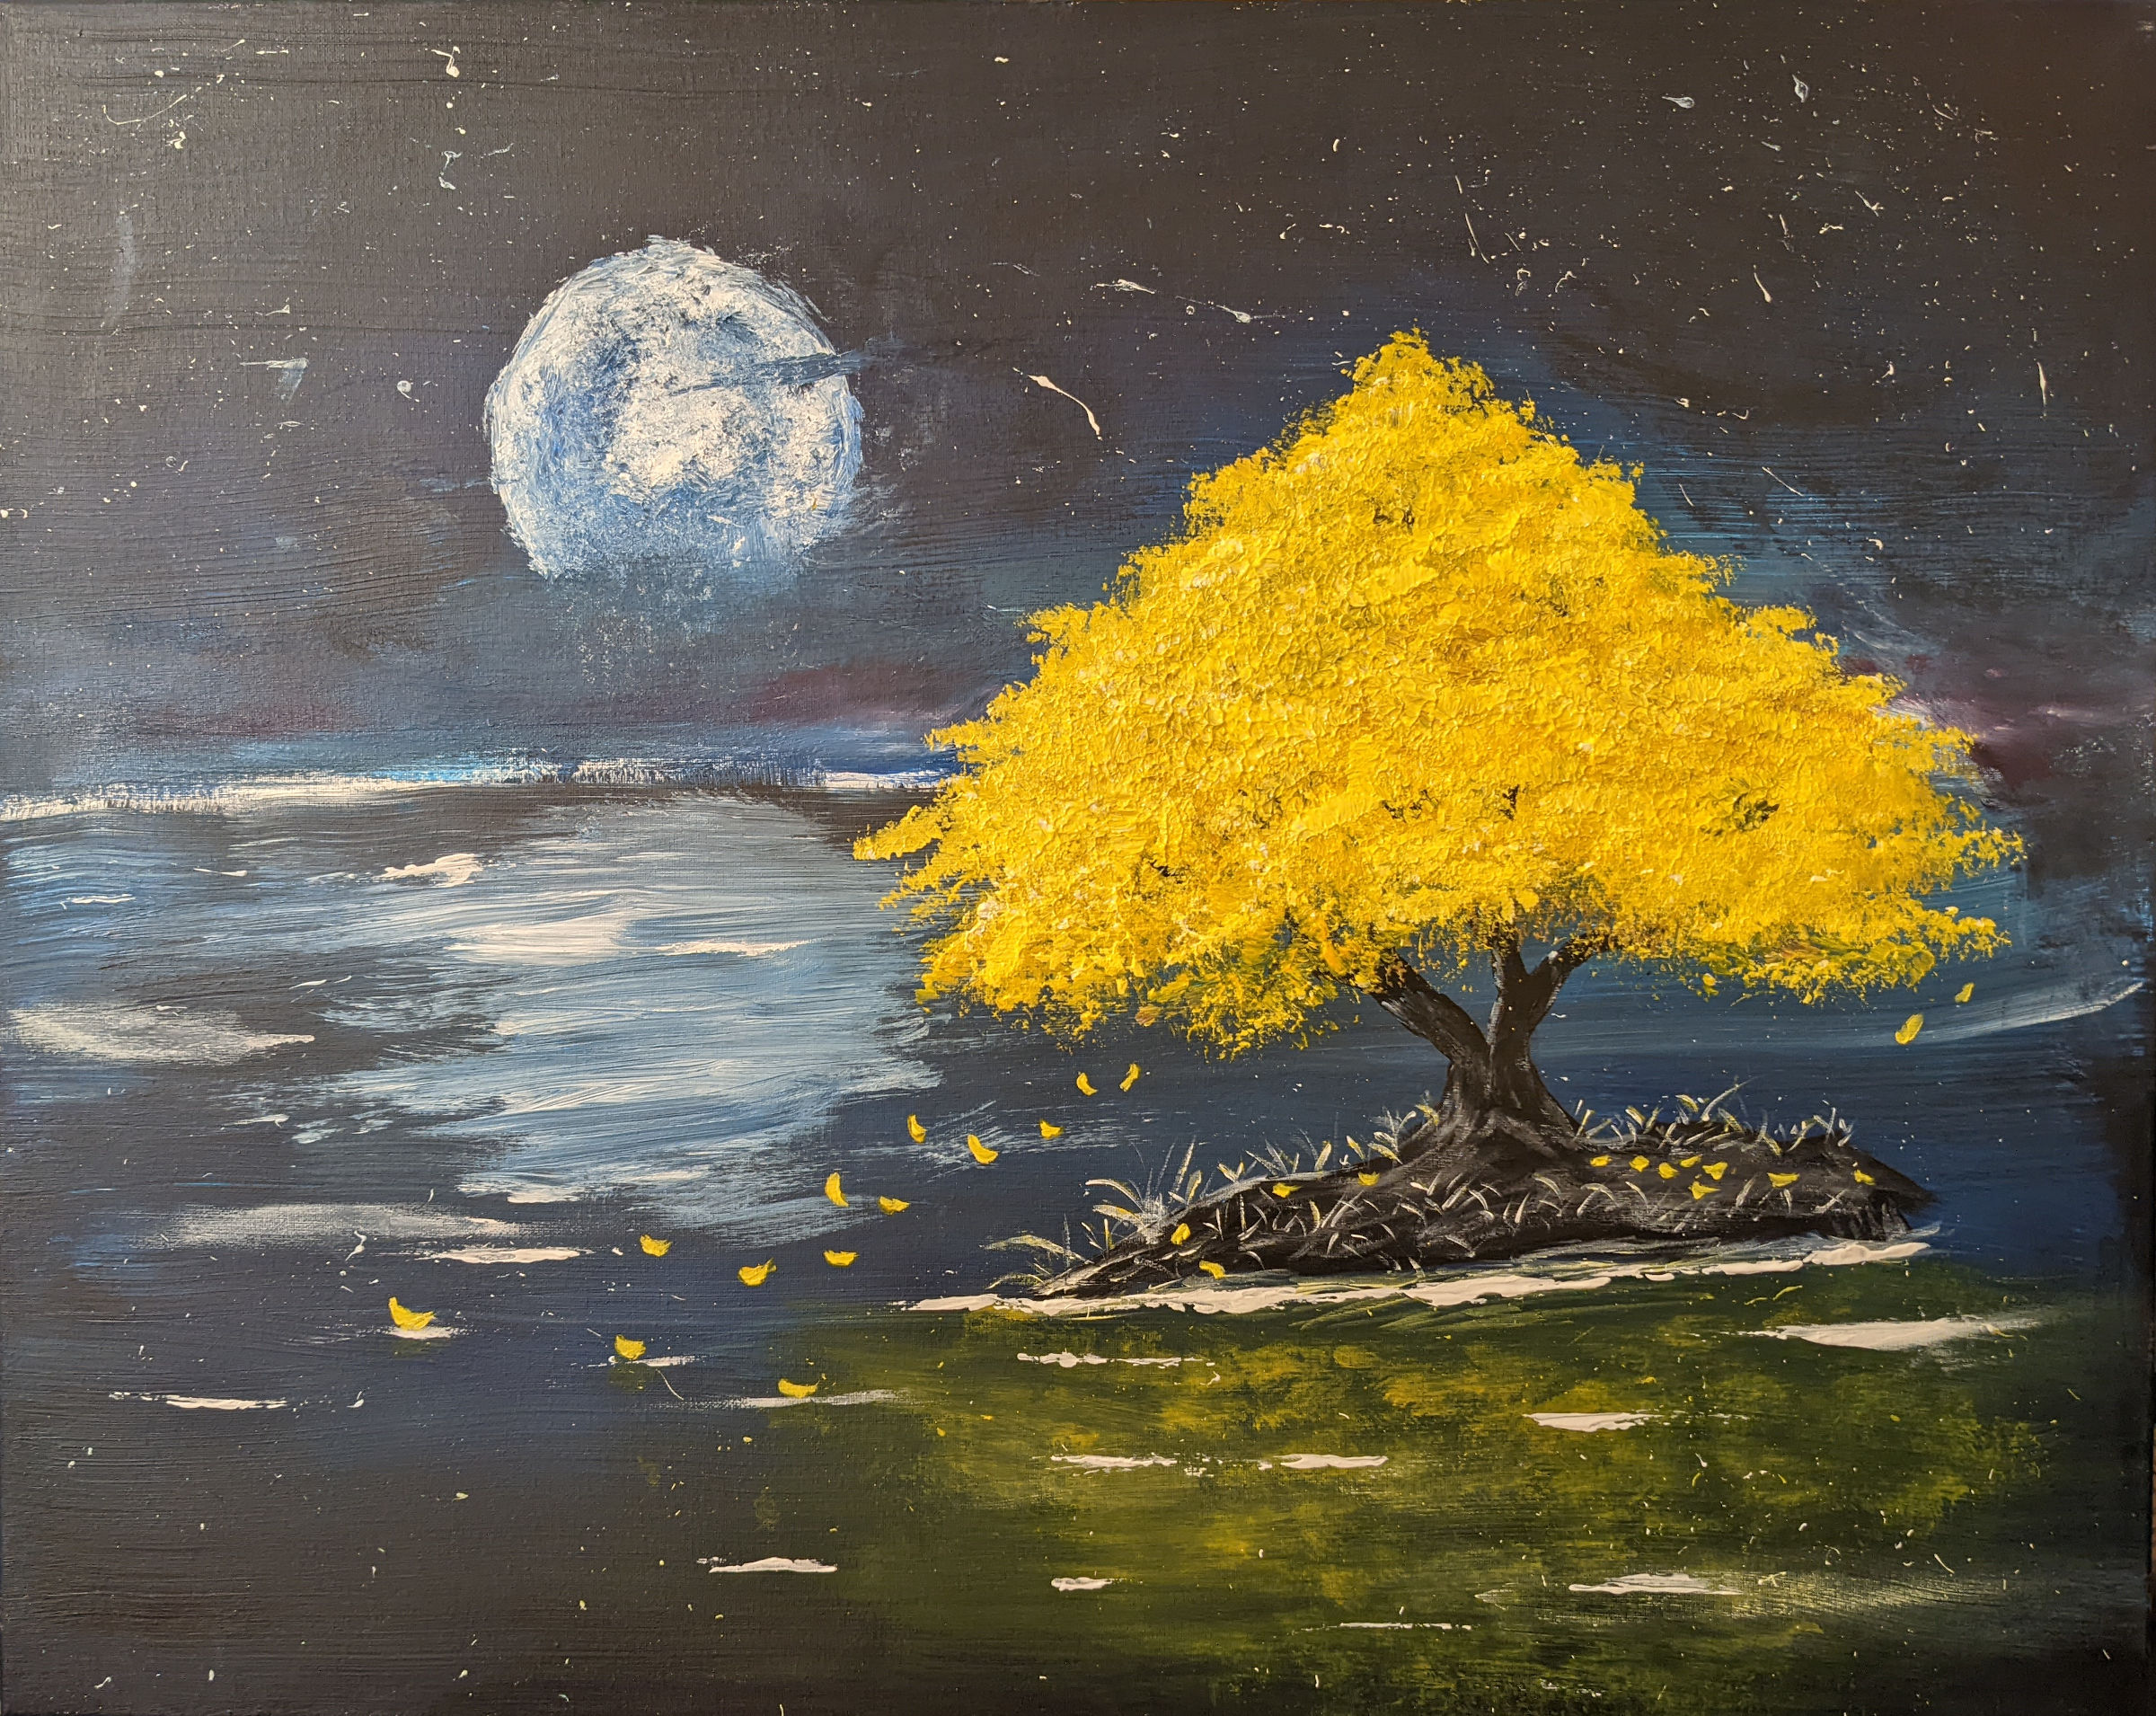 Bright yellow tree on a small island in the middle of water at night. Its leaves are blowing in the wind.